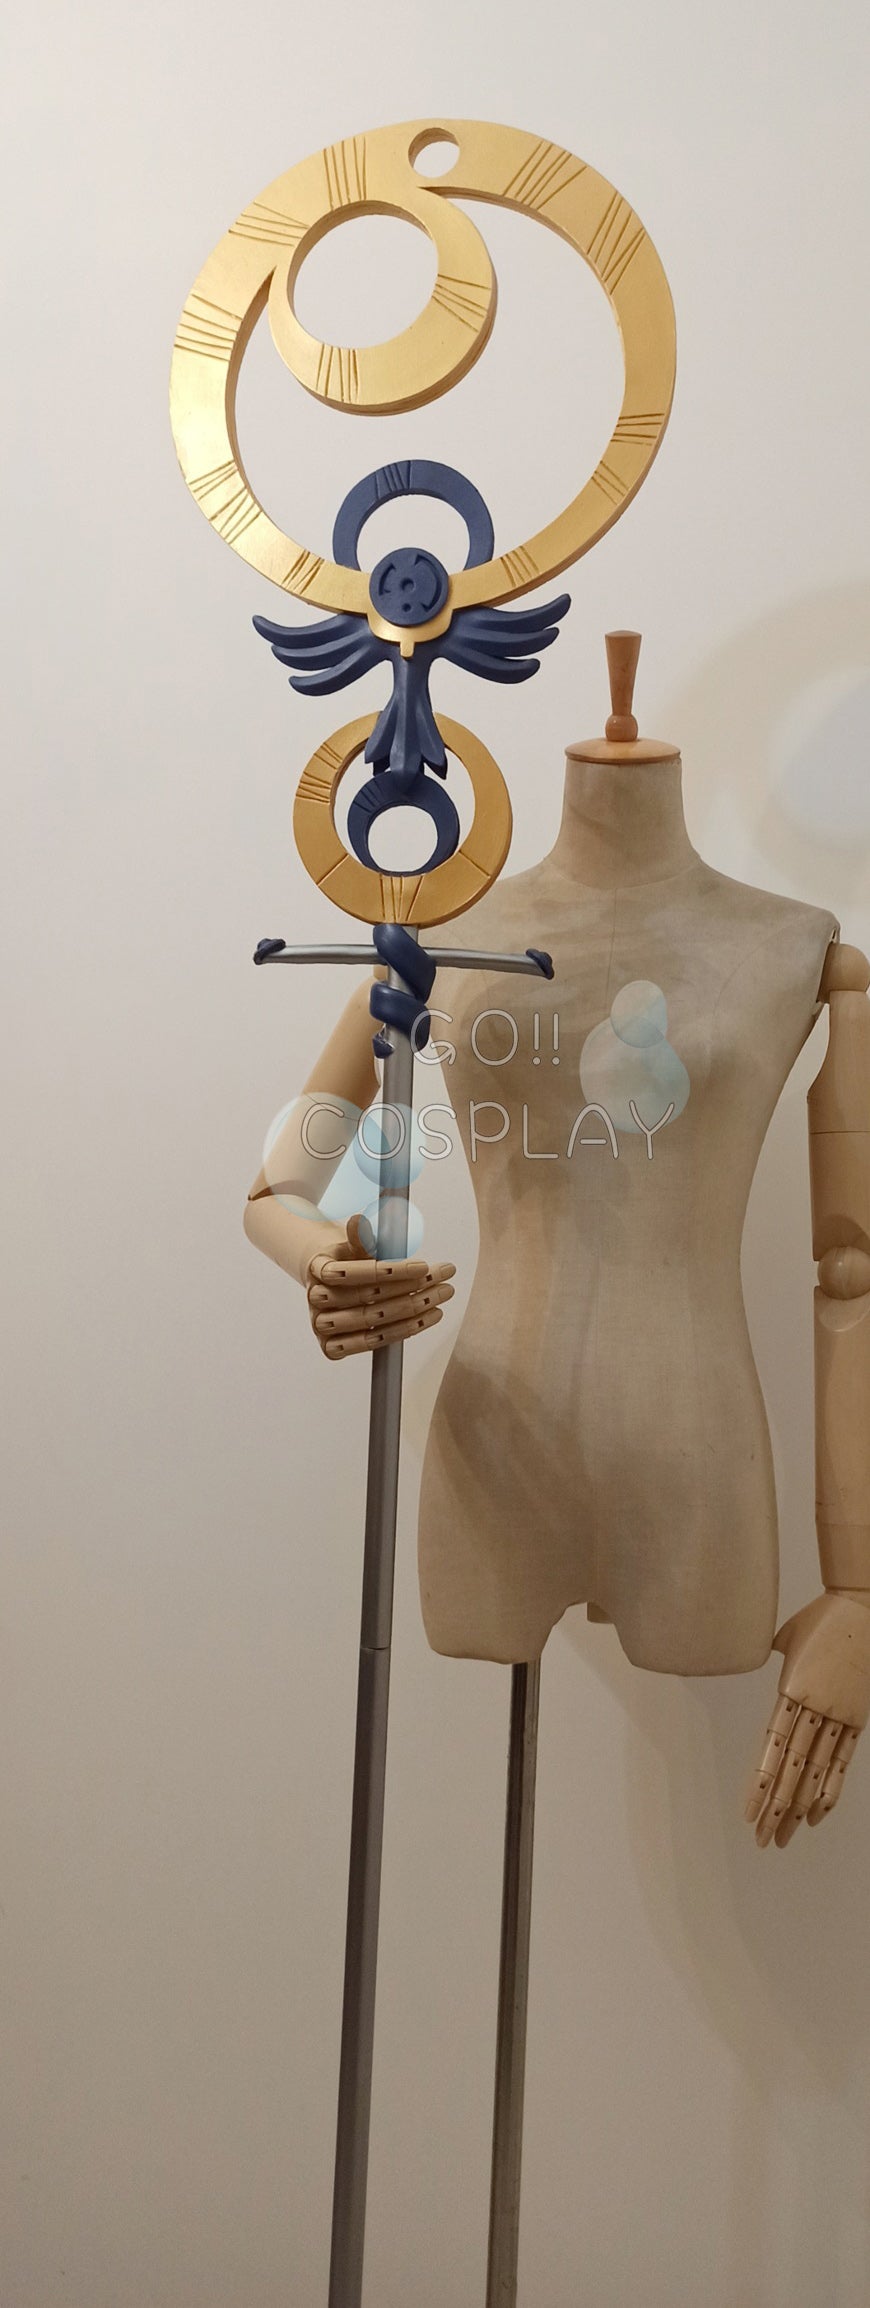 Medea Lily Cosplay Staff for Sale